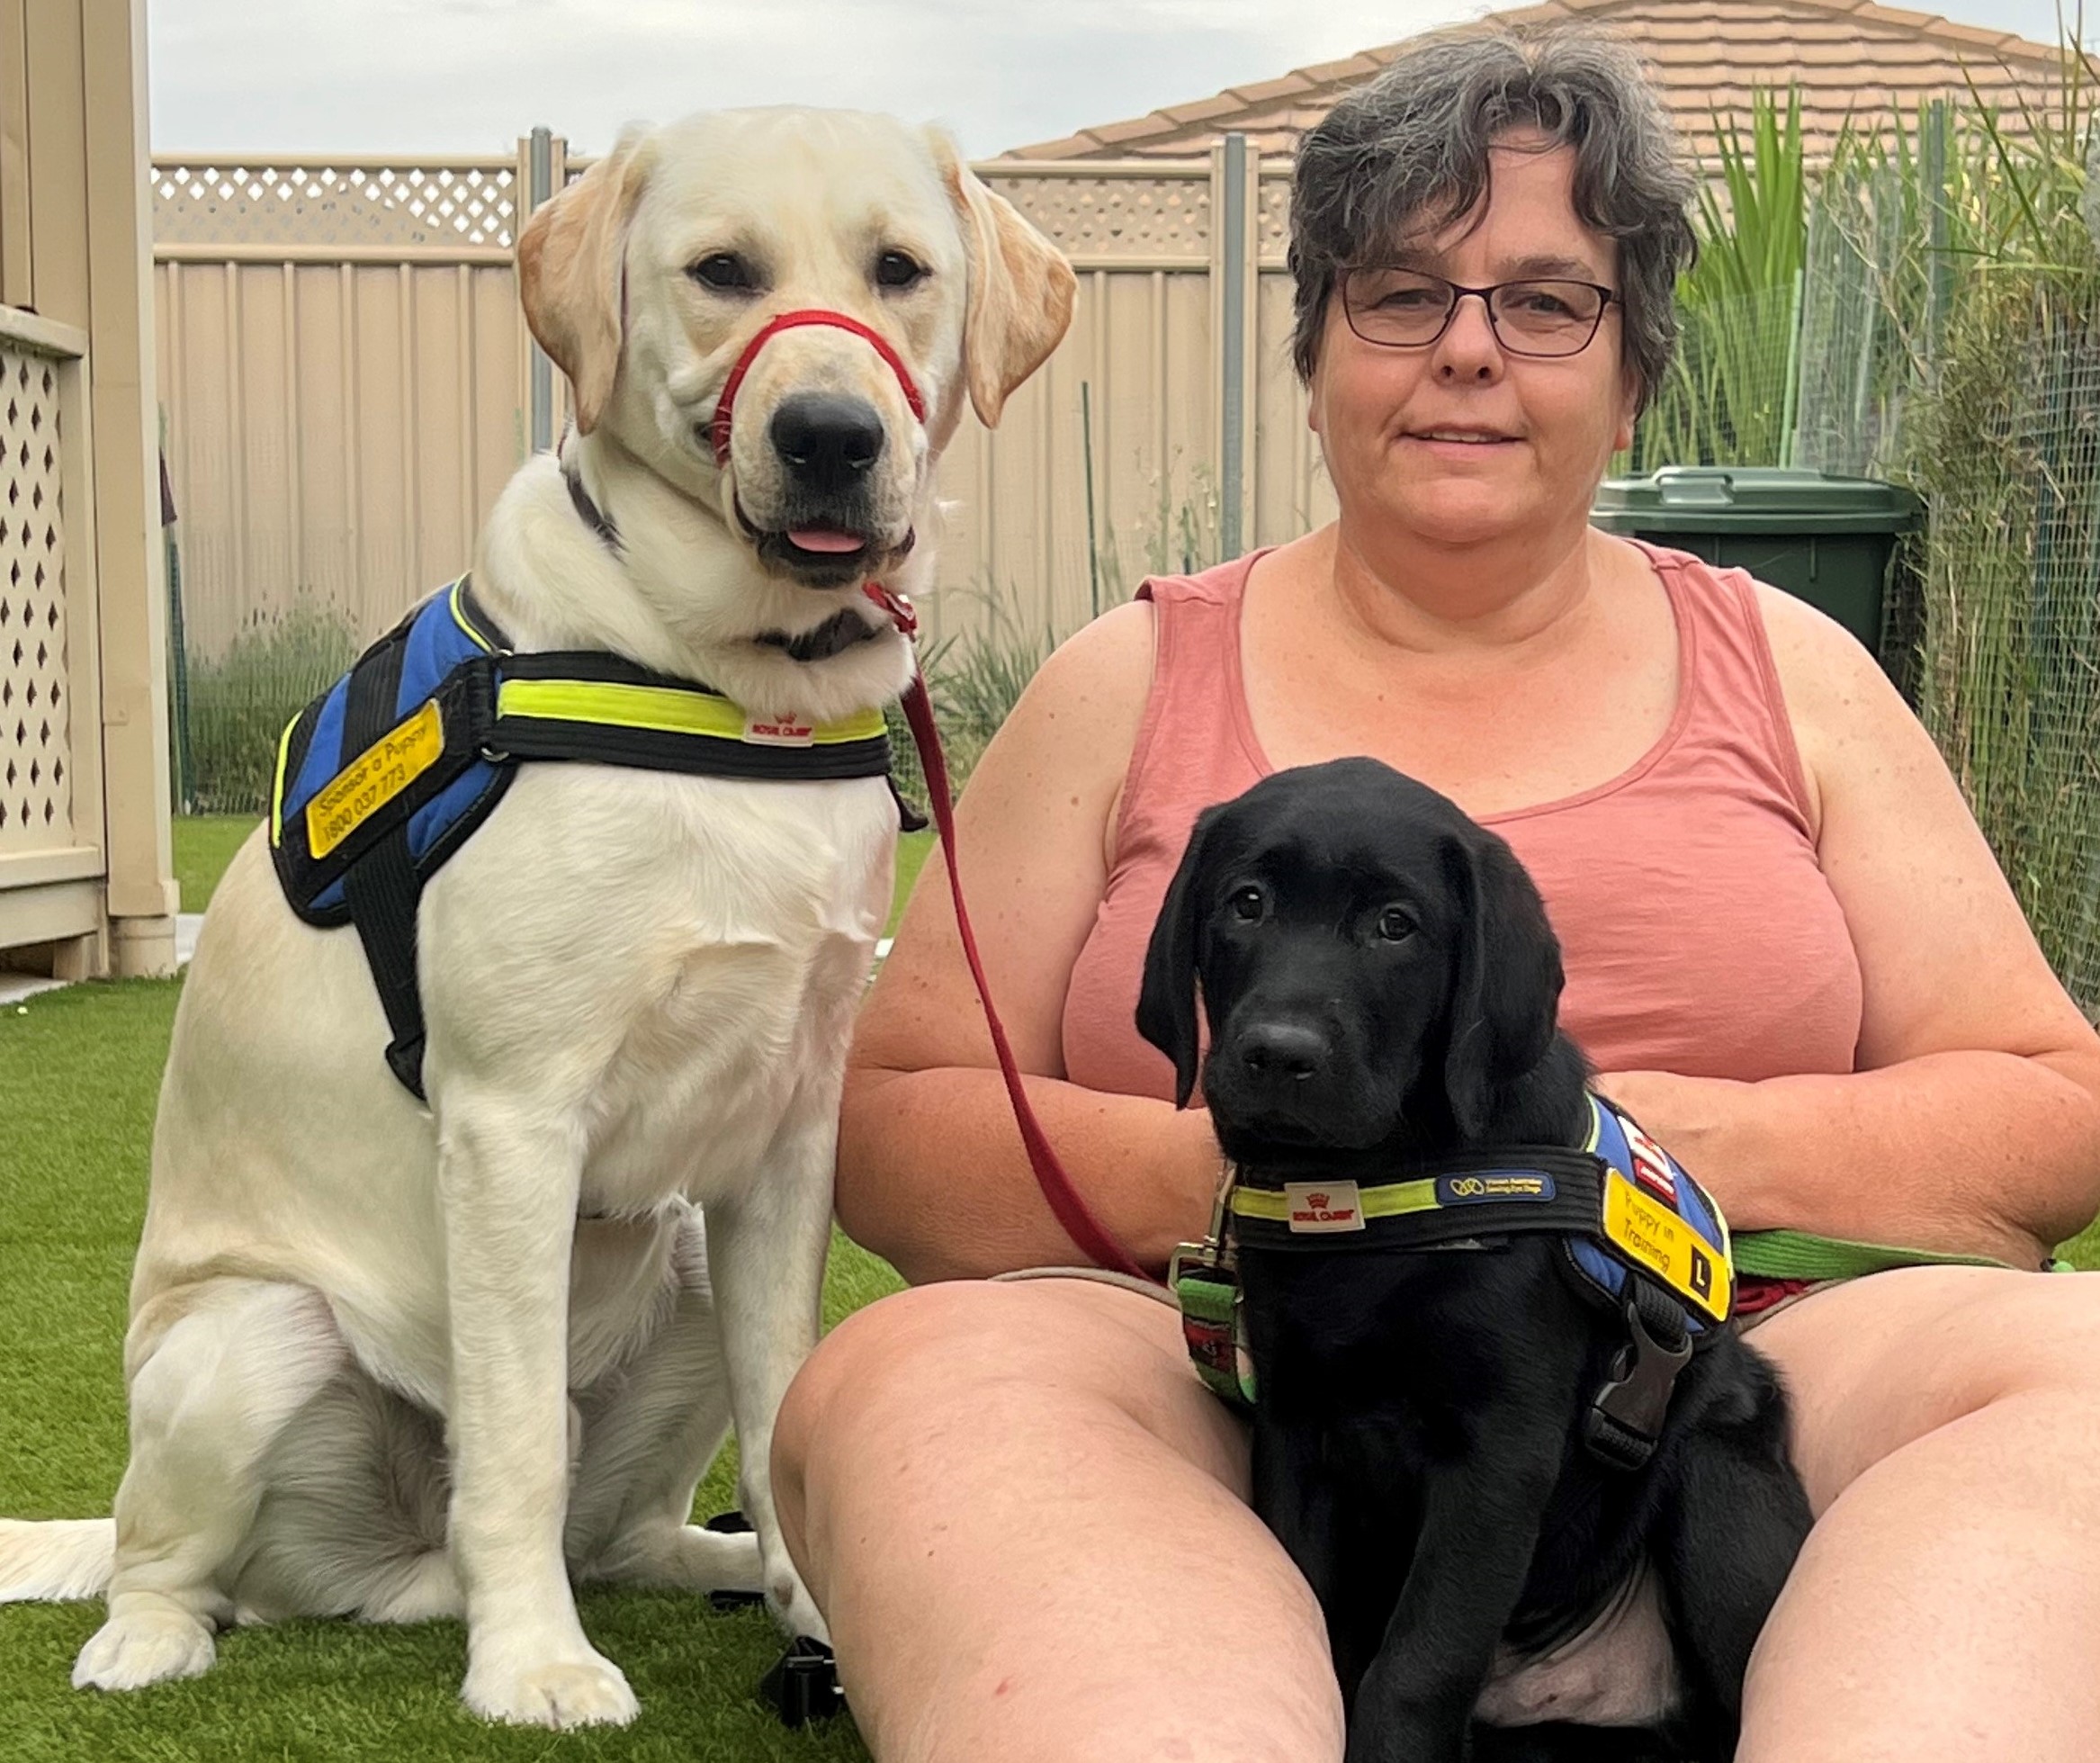 "Georgina sitting next to a fully grown yellow Seeing Eye Dog with a black Seeing Eye Dog sat in her lap."